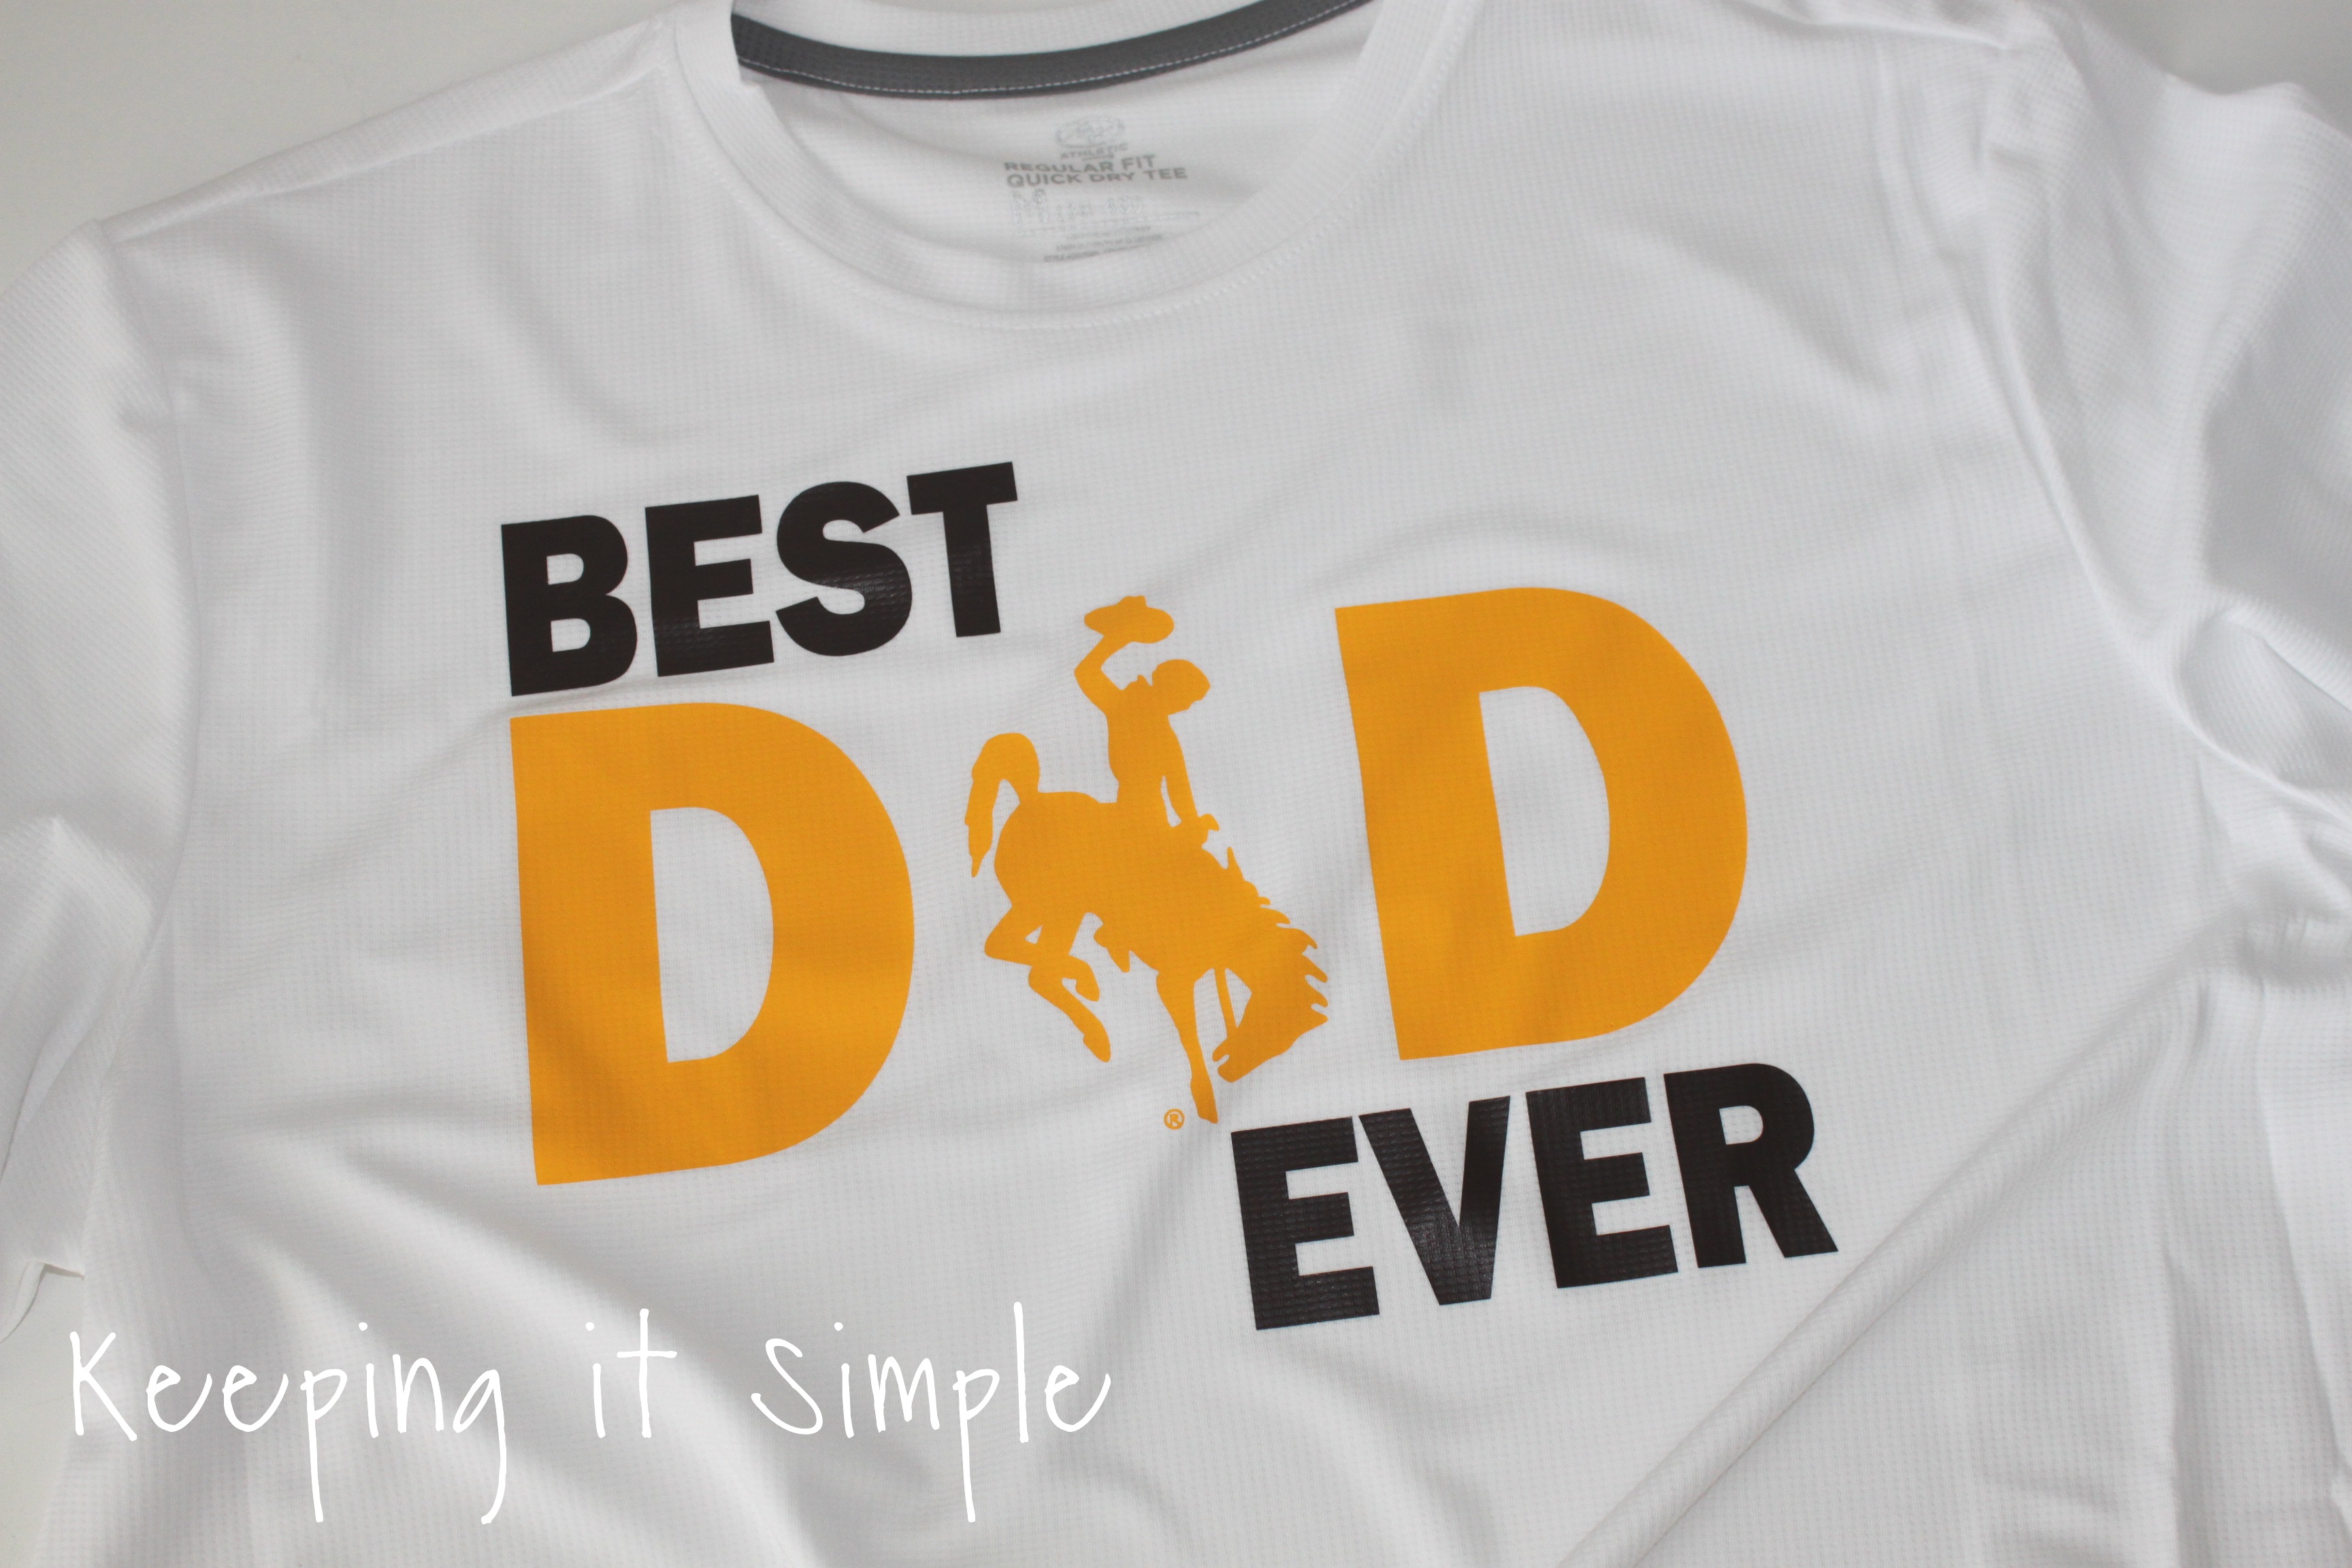 Fathers-day-shirt-wyoming-cowboys-best-dad-ever (9)2 • Keeping it Simple